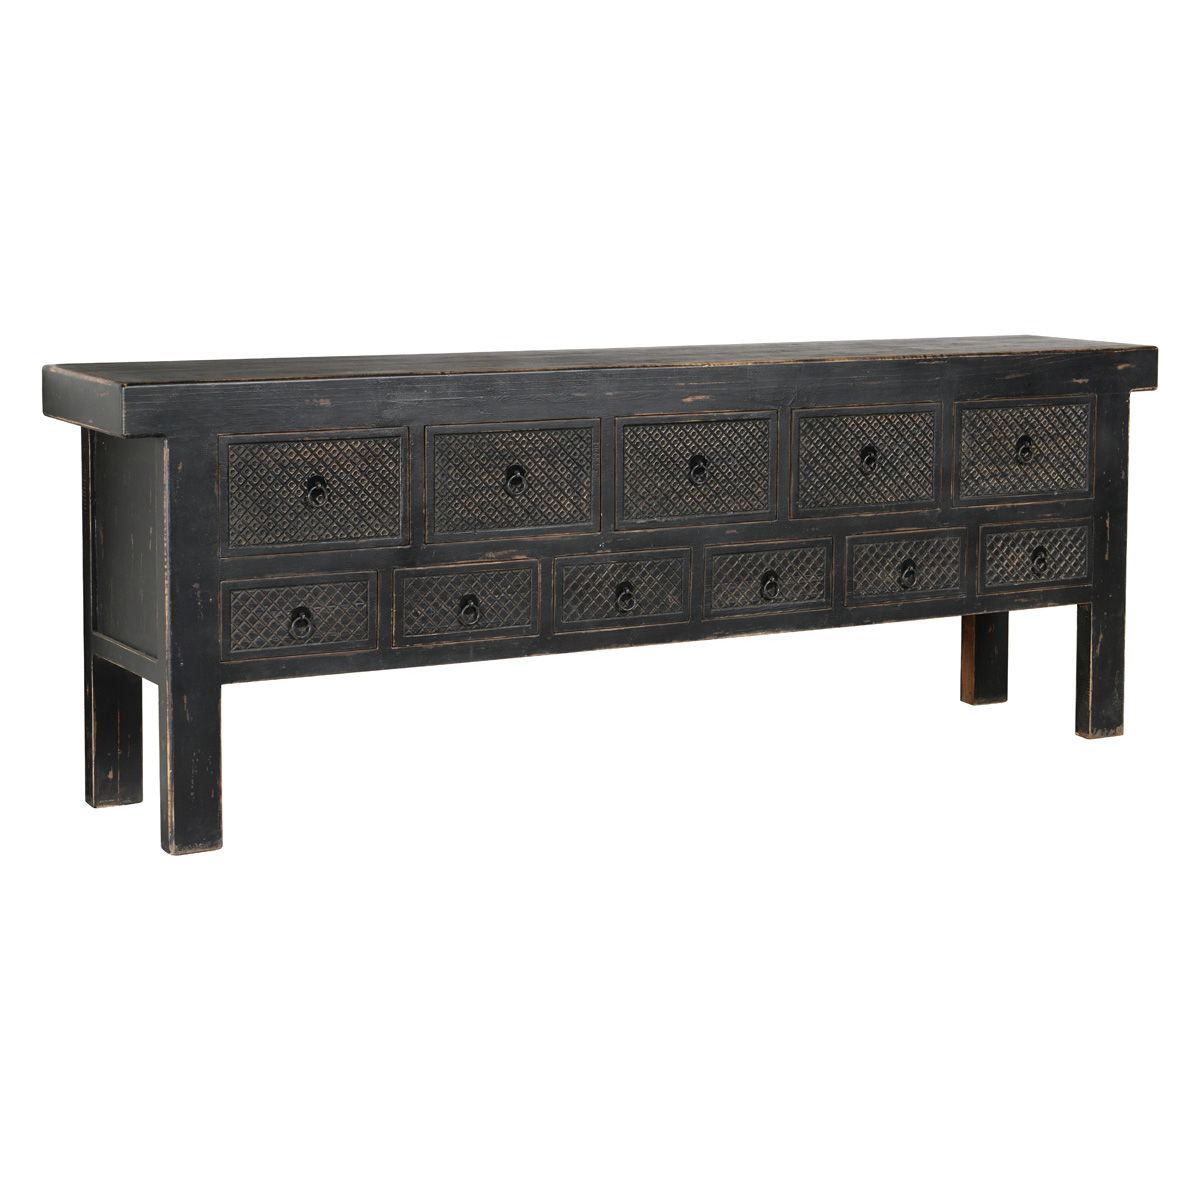 Lahey - 11 Drawer Console Table